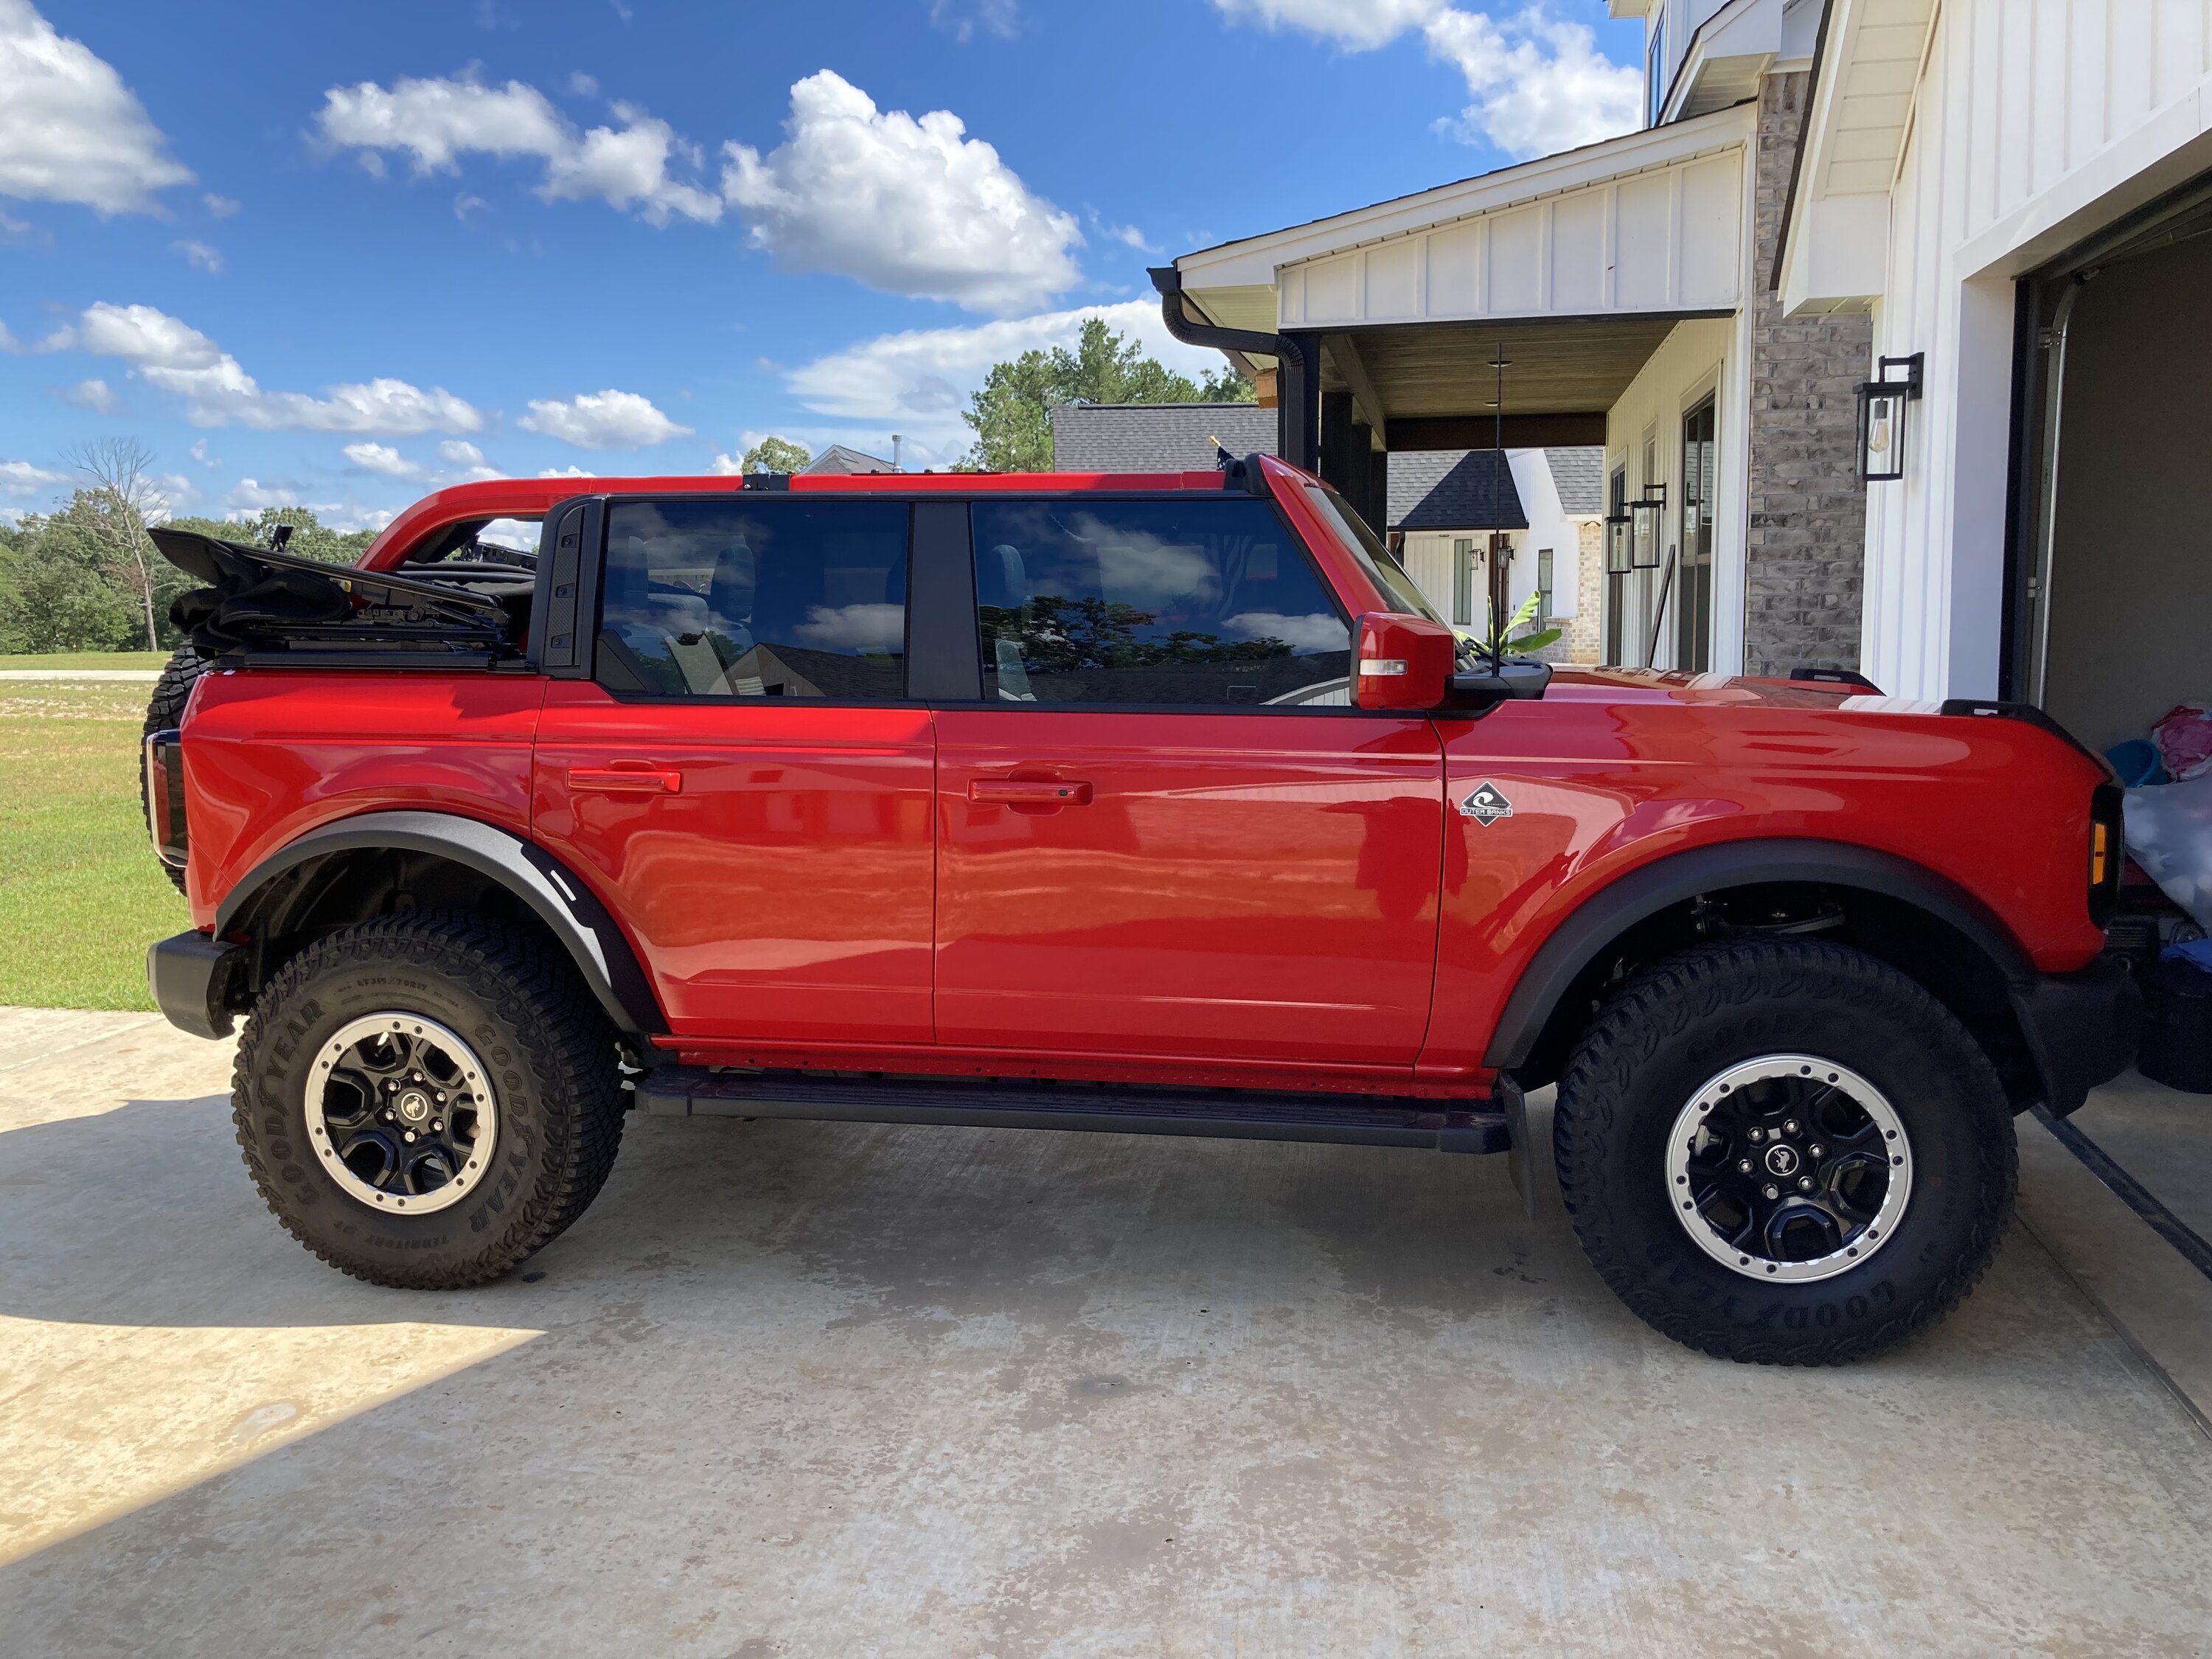 Ford Bronco Tint reference gallery -- post your Bronco pics & specs 📸 😎 FE8DBF36-4733-46DF-A0A5-9D9124B9FE22